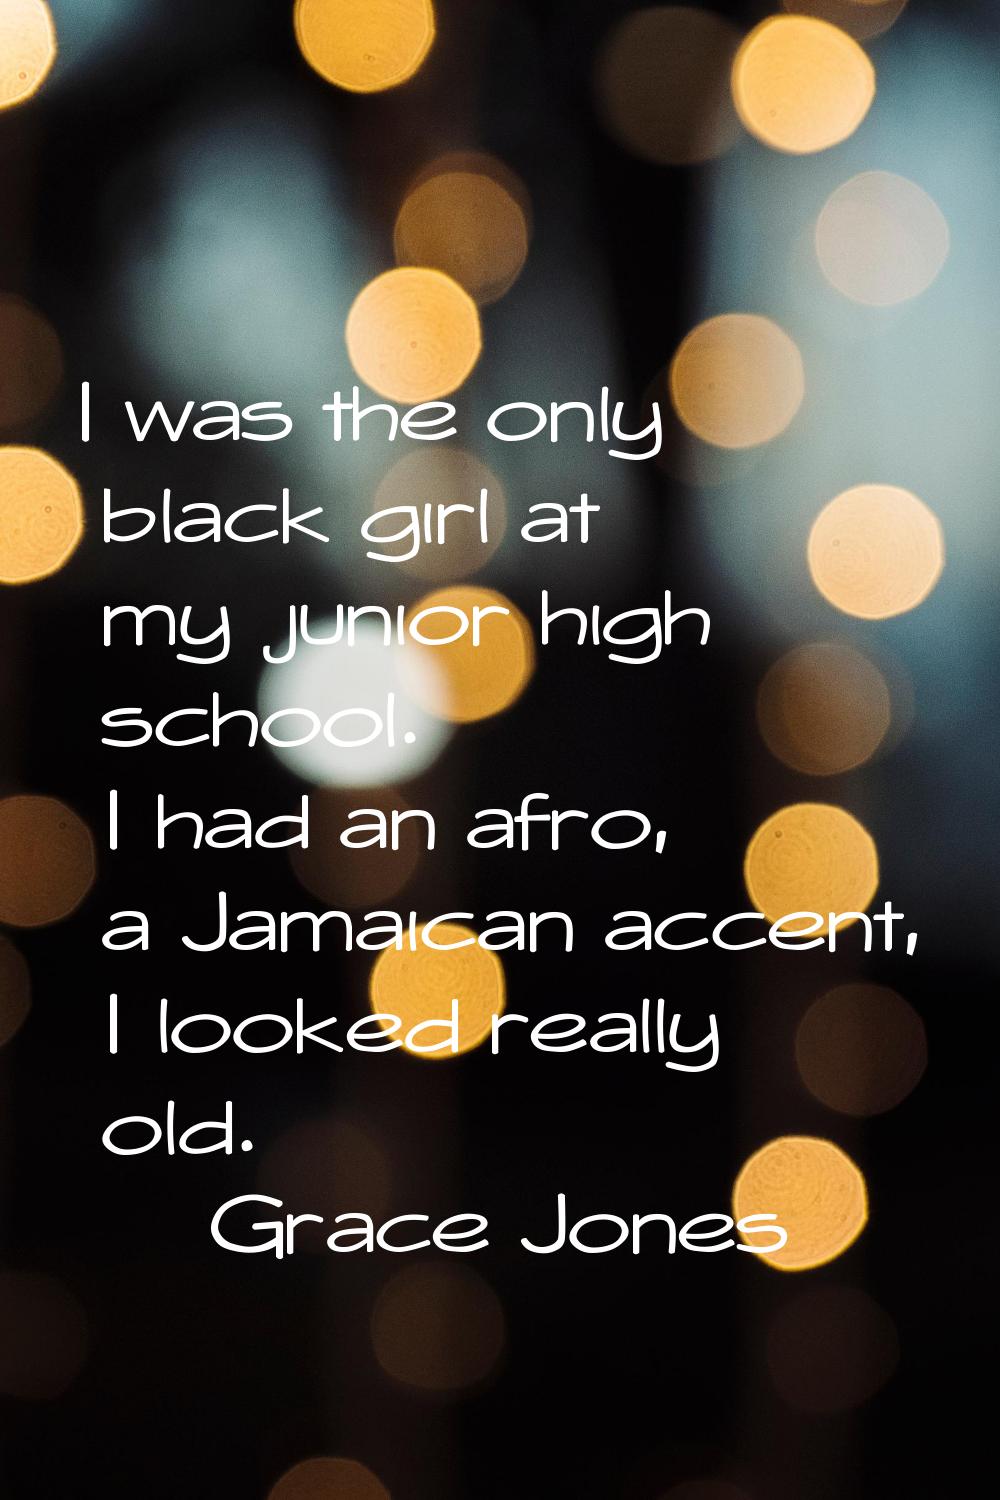 I was the only black girl at my junior high school. I had an afro, a Jamaican accent, I looked real